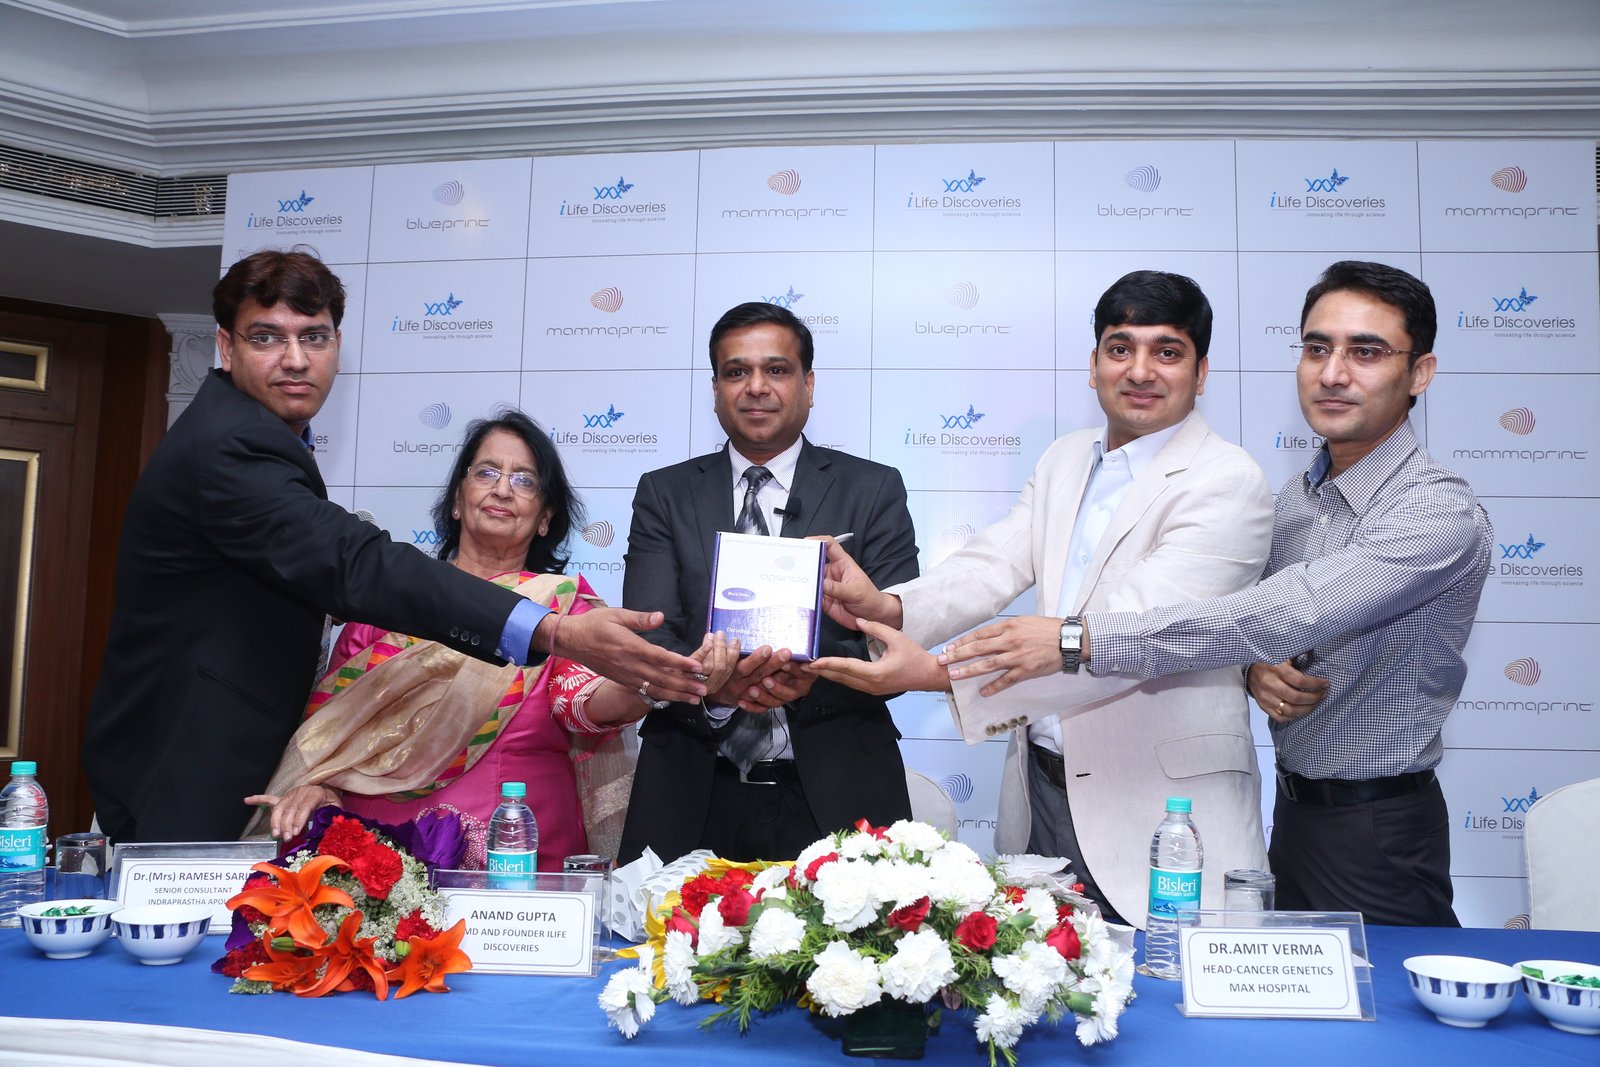 At a press conference, Mr Anand Gupta, founder and CMD, iLife Discoveries was joined by leading oncologists of the capital to unveil the new gene test